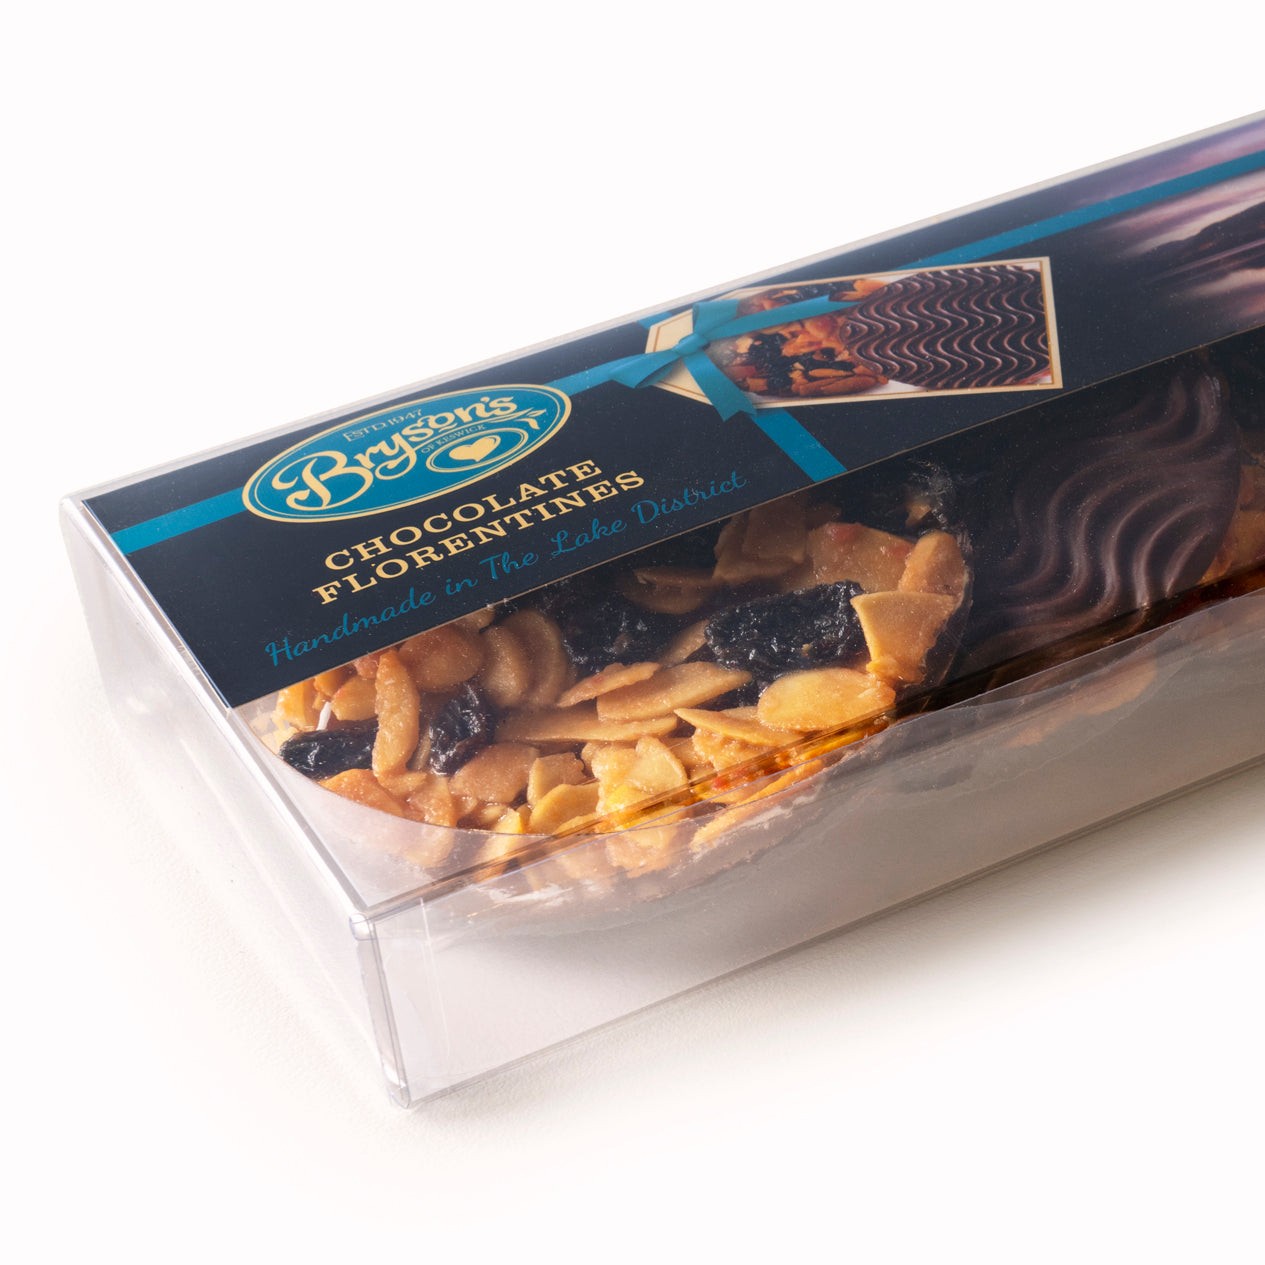 Bryson's famous Chocolate Florentines in their packaging.